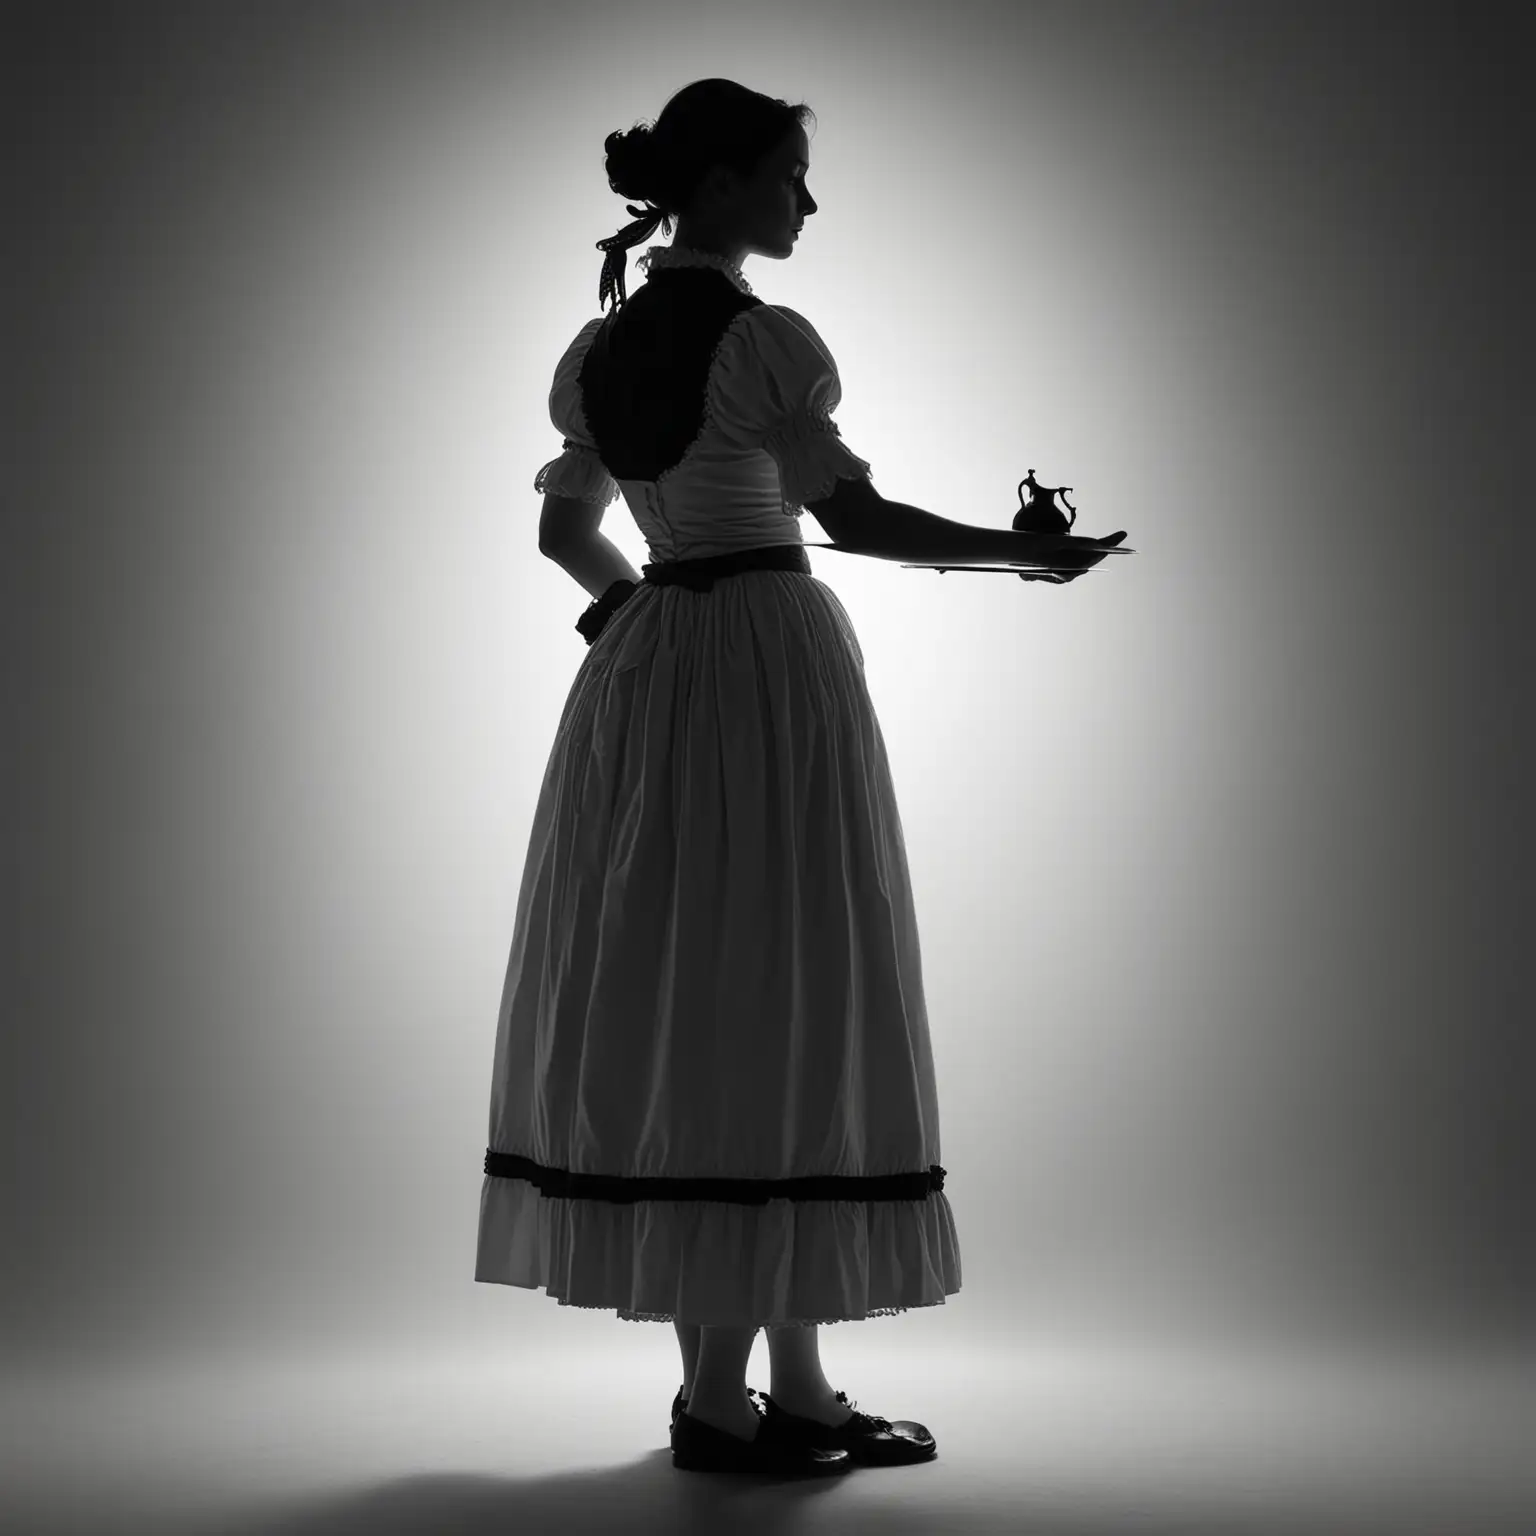 Antique-Maidservant-Silhouette-Composition-in-High-Definition-8K